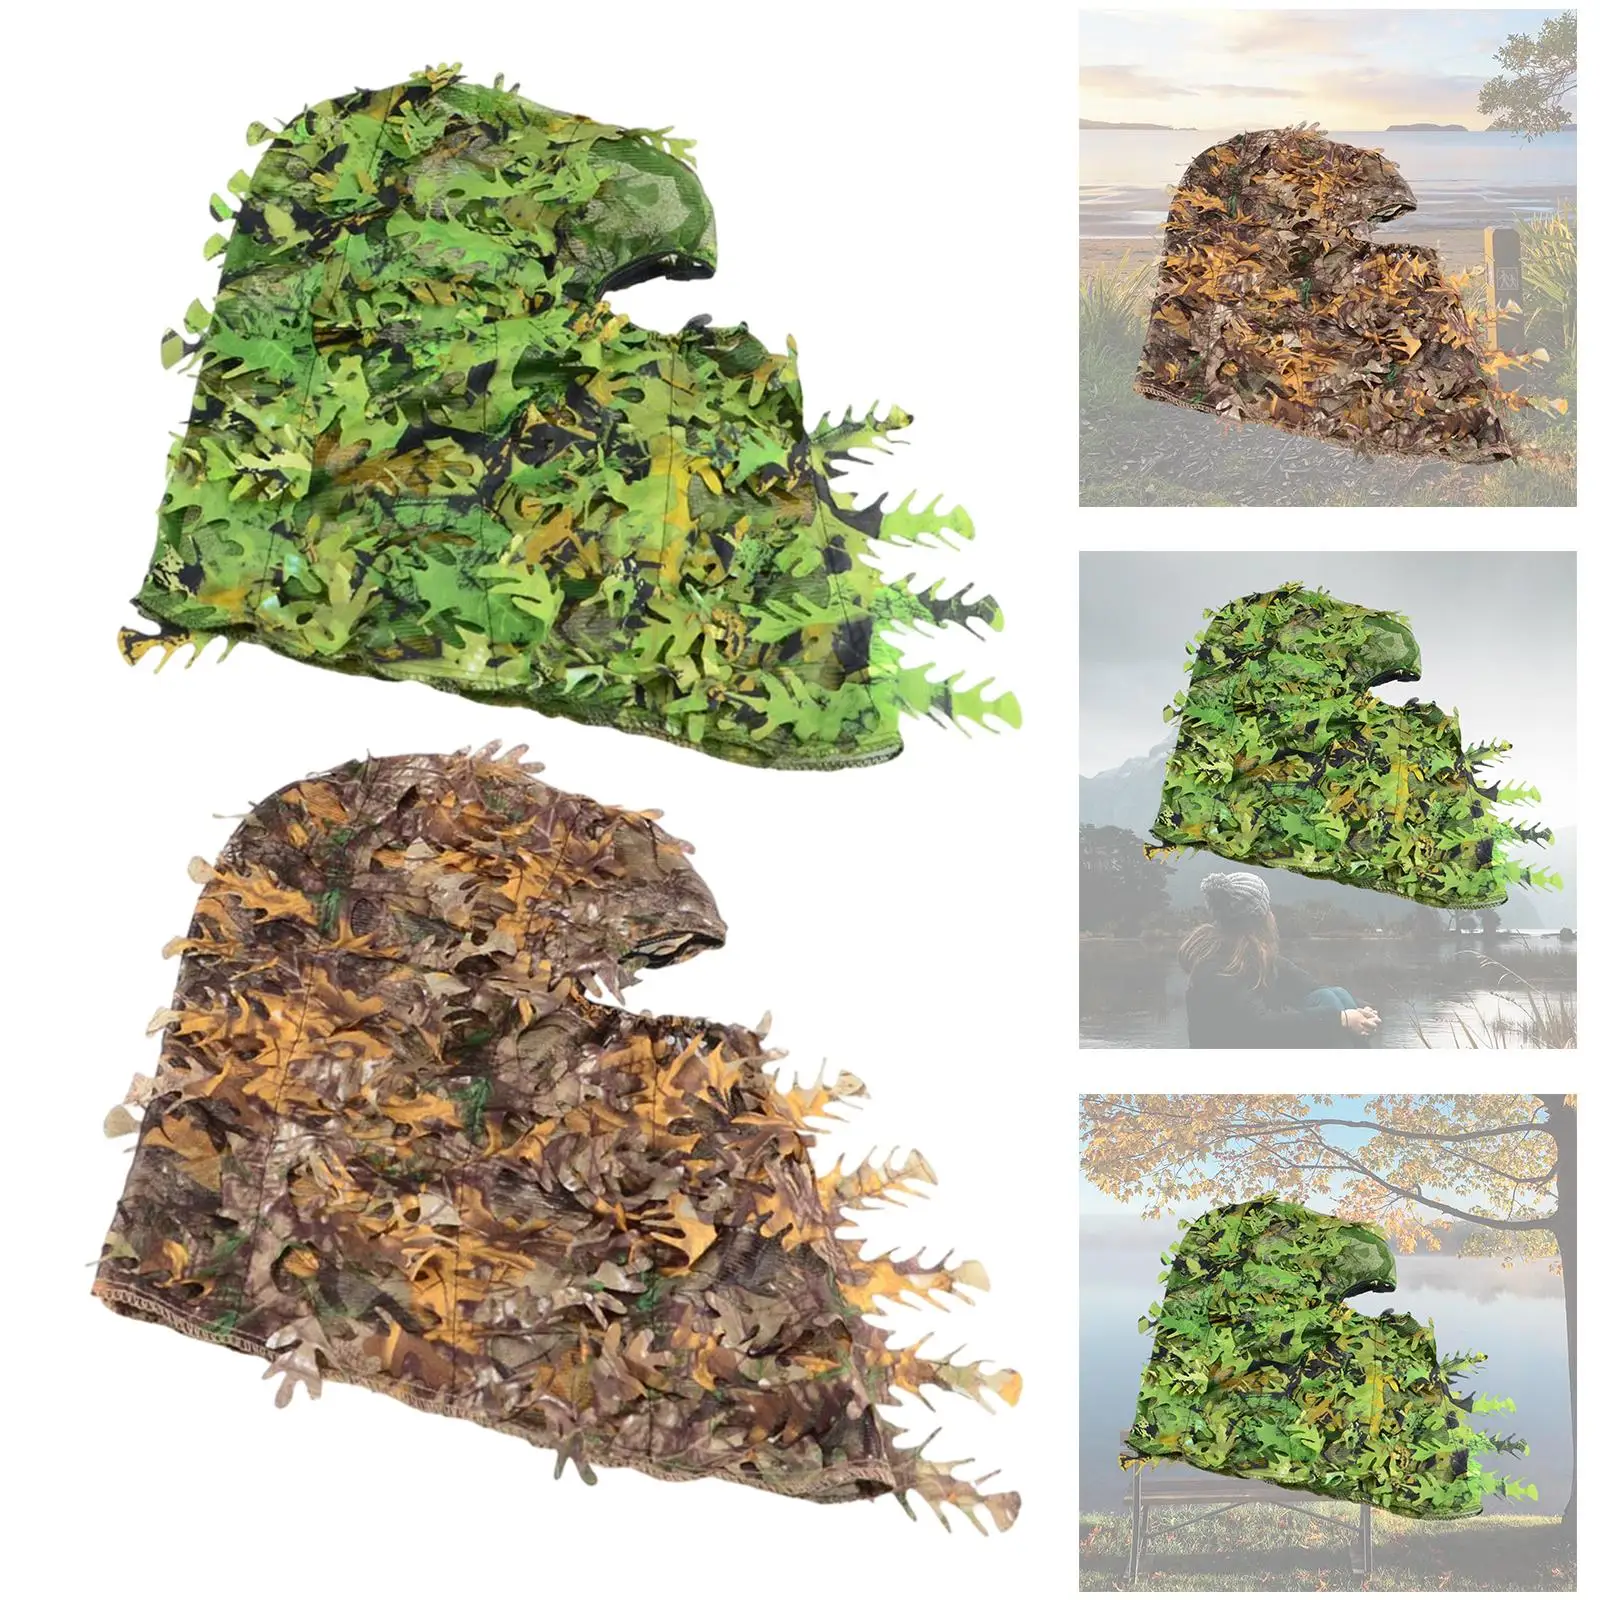 3D Leafy Camouflage Face Mask Camo Full Face Mask Lightweight Breathable Ghillie Hood Headwear for Hunting Paintball